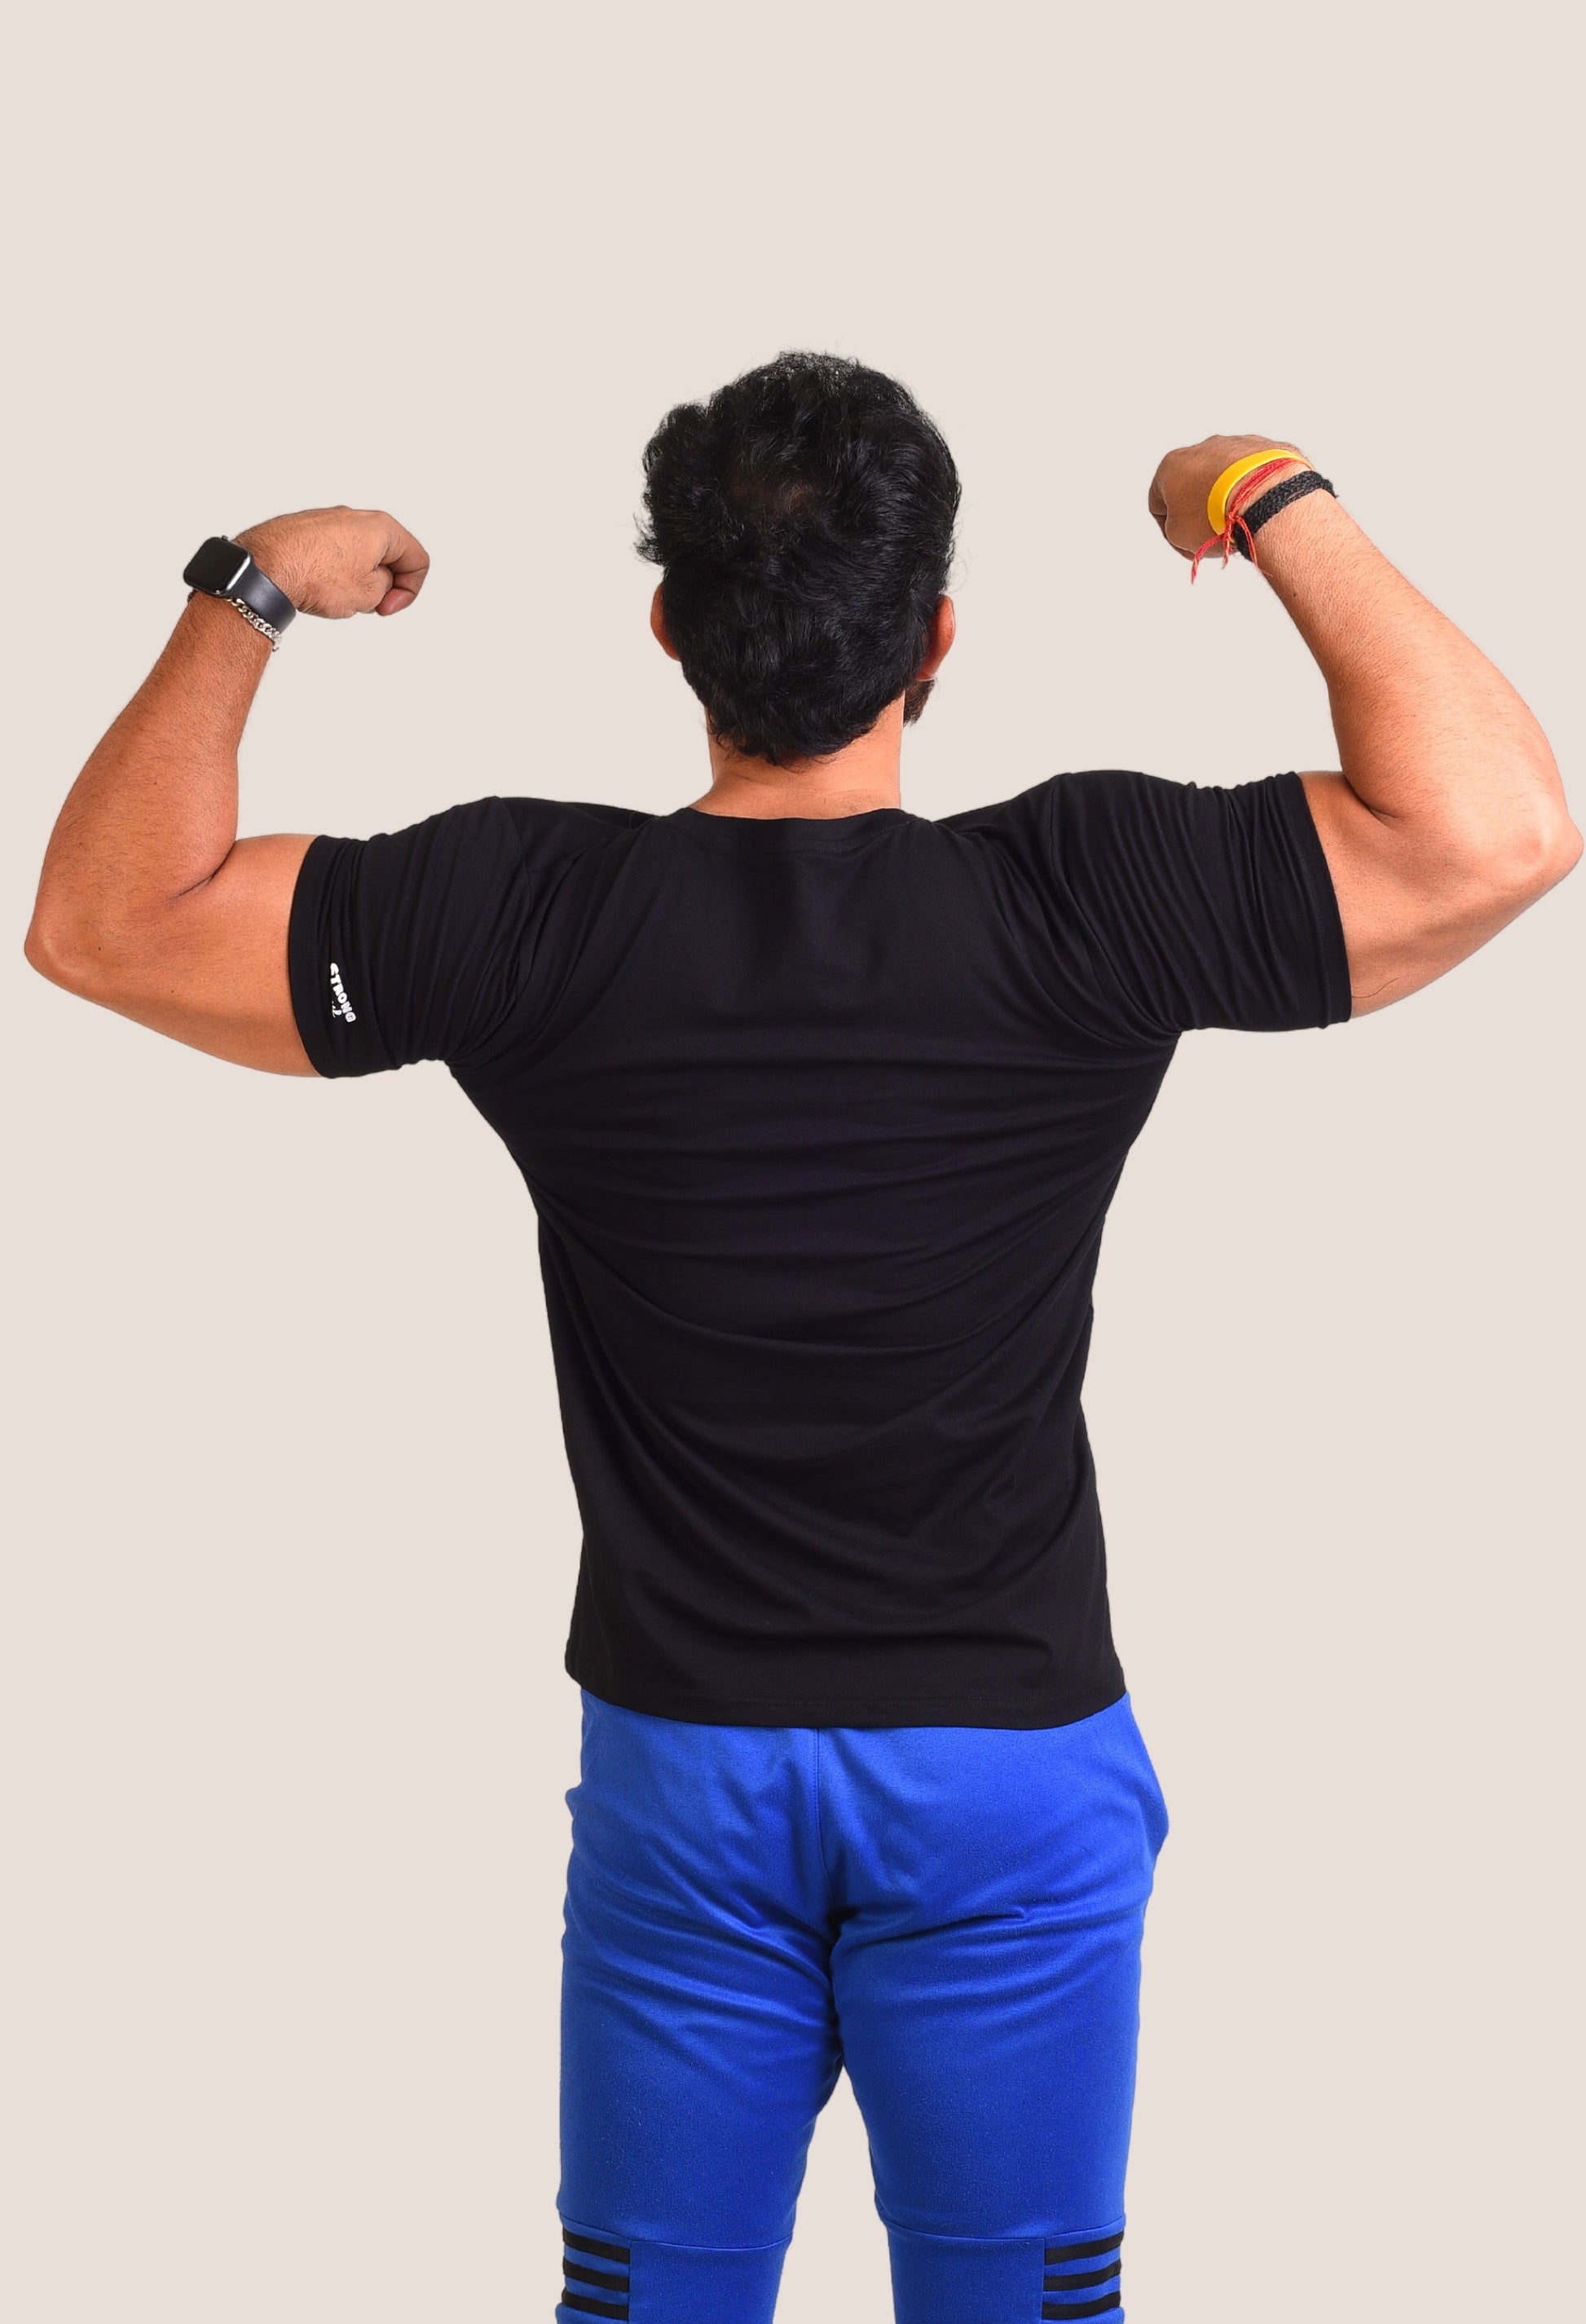 Gym T Shirt - Iron Strong - Men T-Shirt with premium cotton Lycra. The Sports T Shirt by Strong Soul